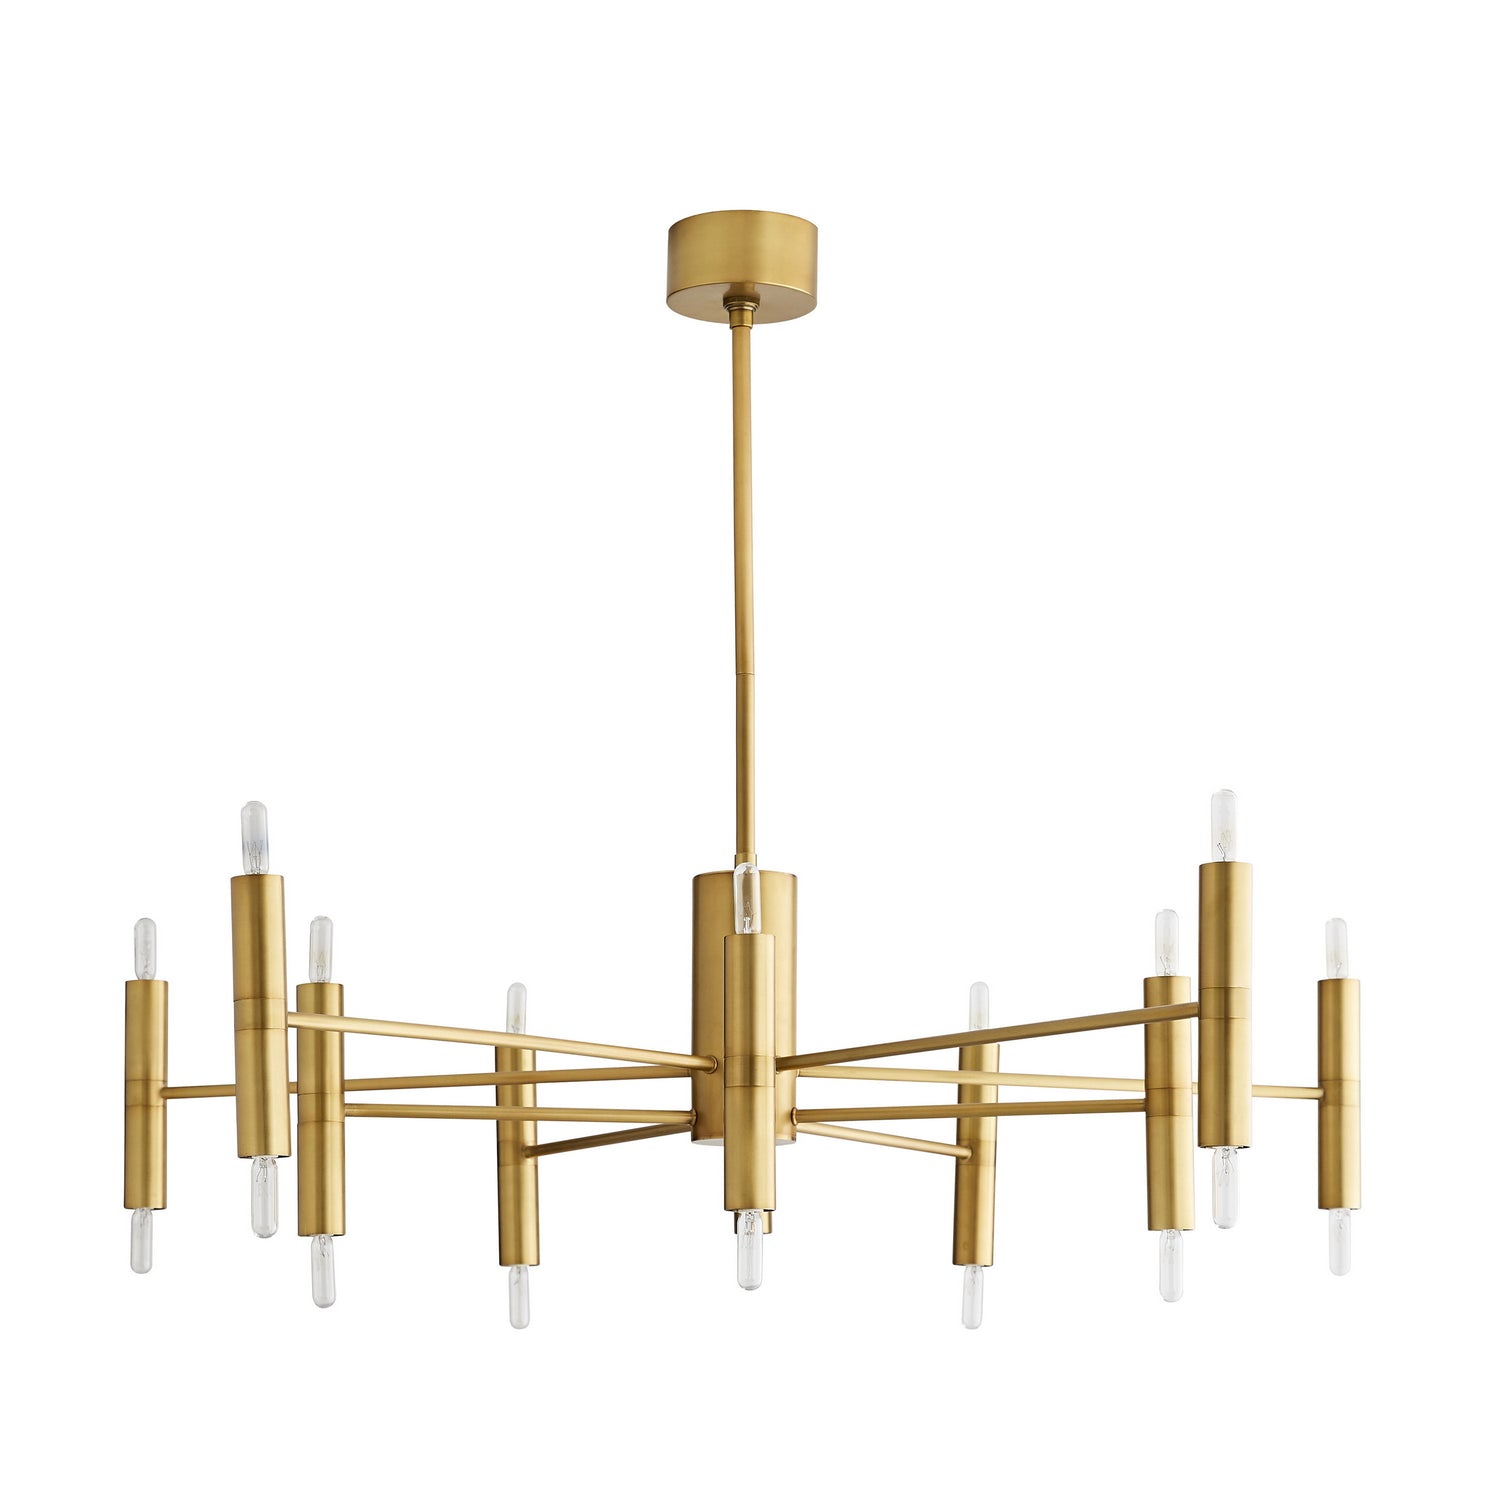 20 Light Chandelier from the Bozeman collection in Antique Brass finish